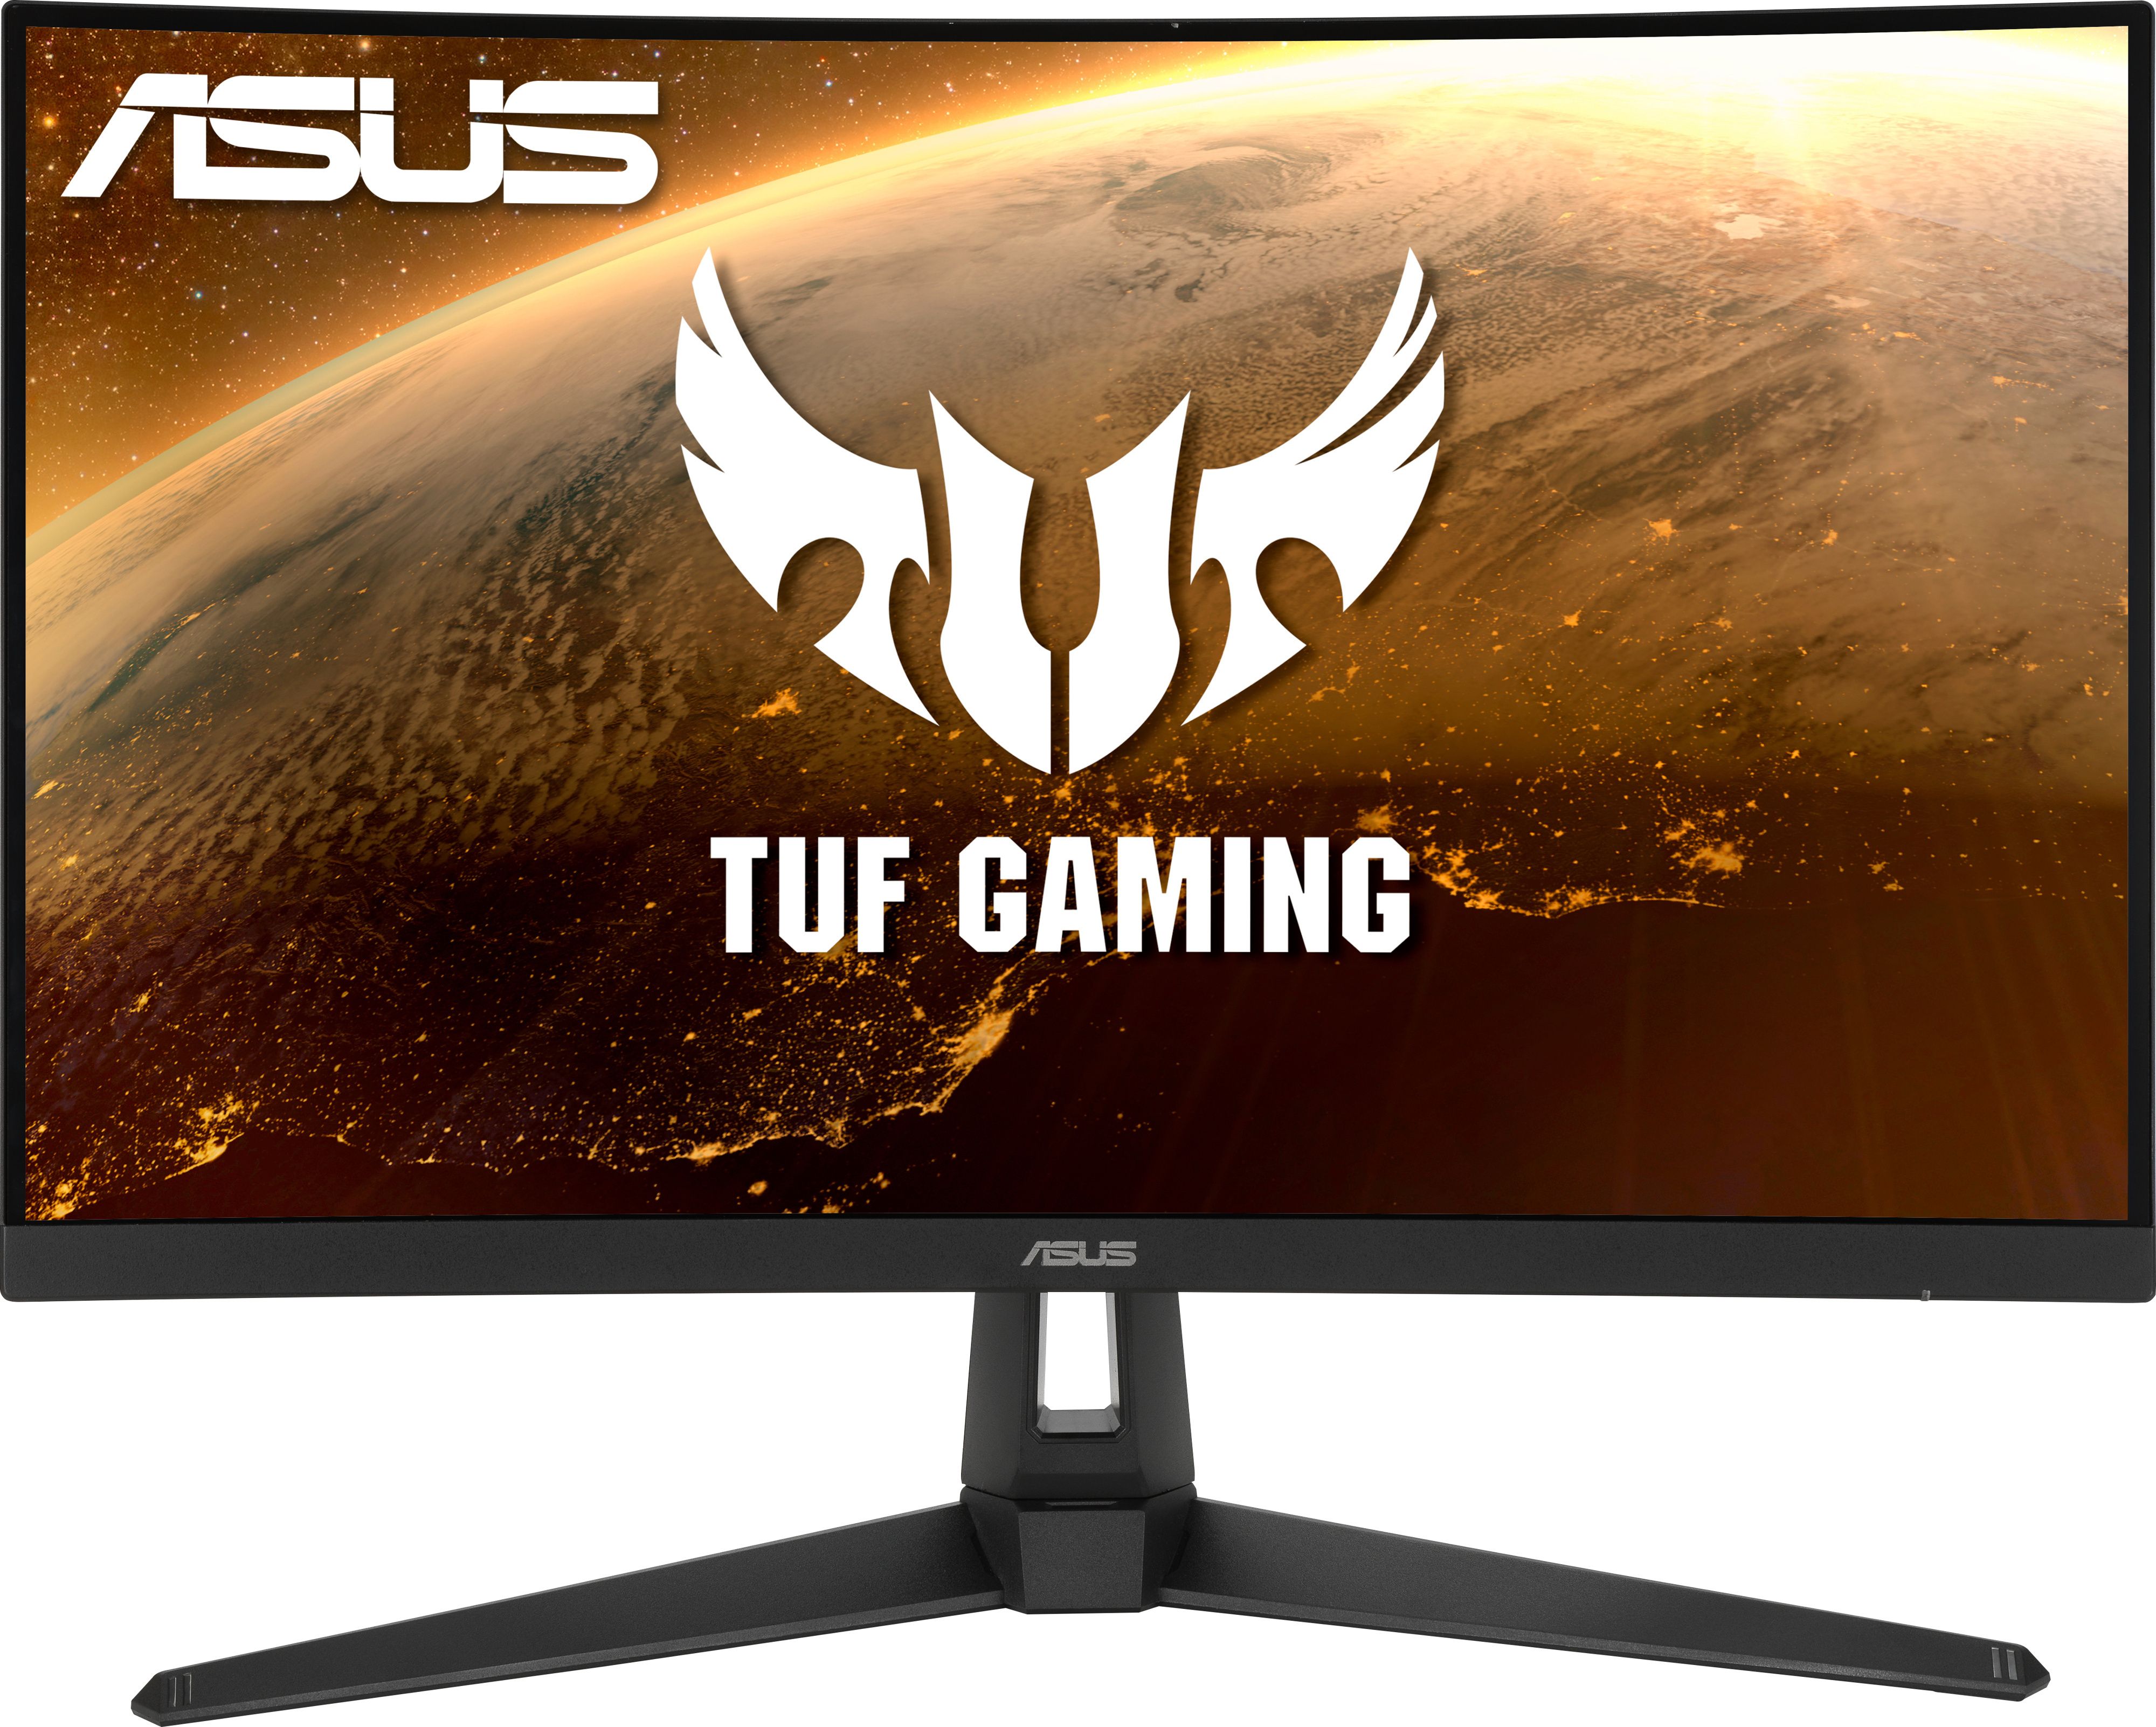 ASUS TUF Gaming VG27WQ1B Curved Gaming Monitor 27inch WQHD 2560x1440 165Hz Above 144Hz Extreme Low Motion Blur Adaptive-sync